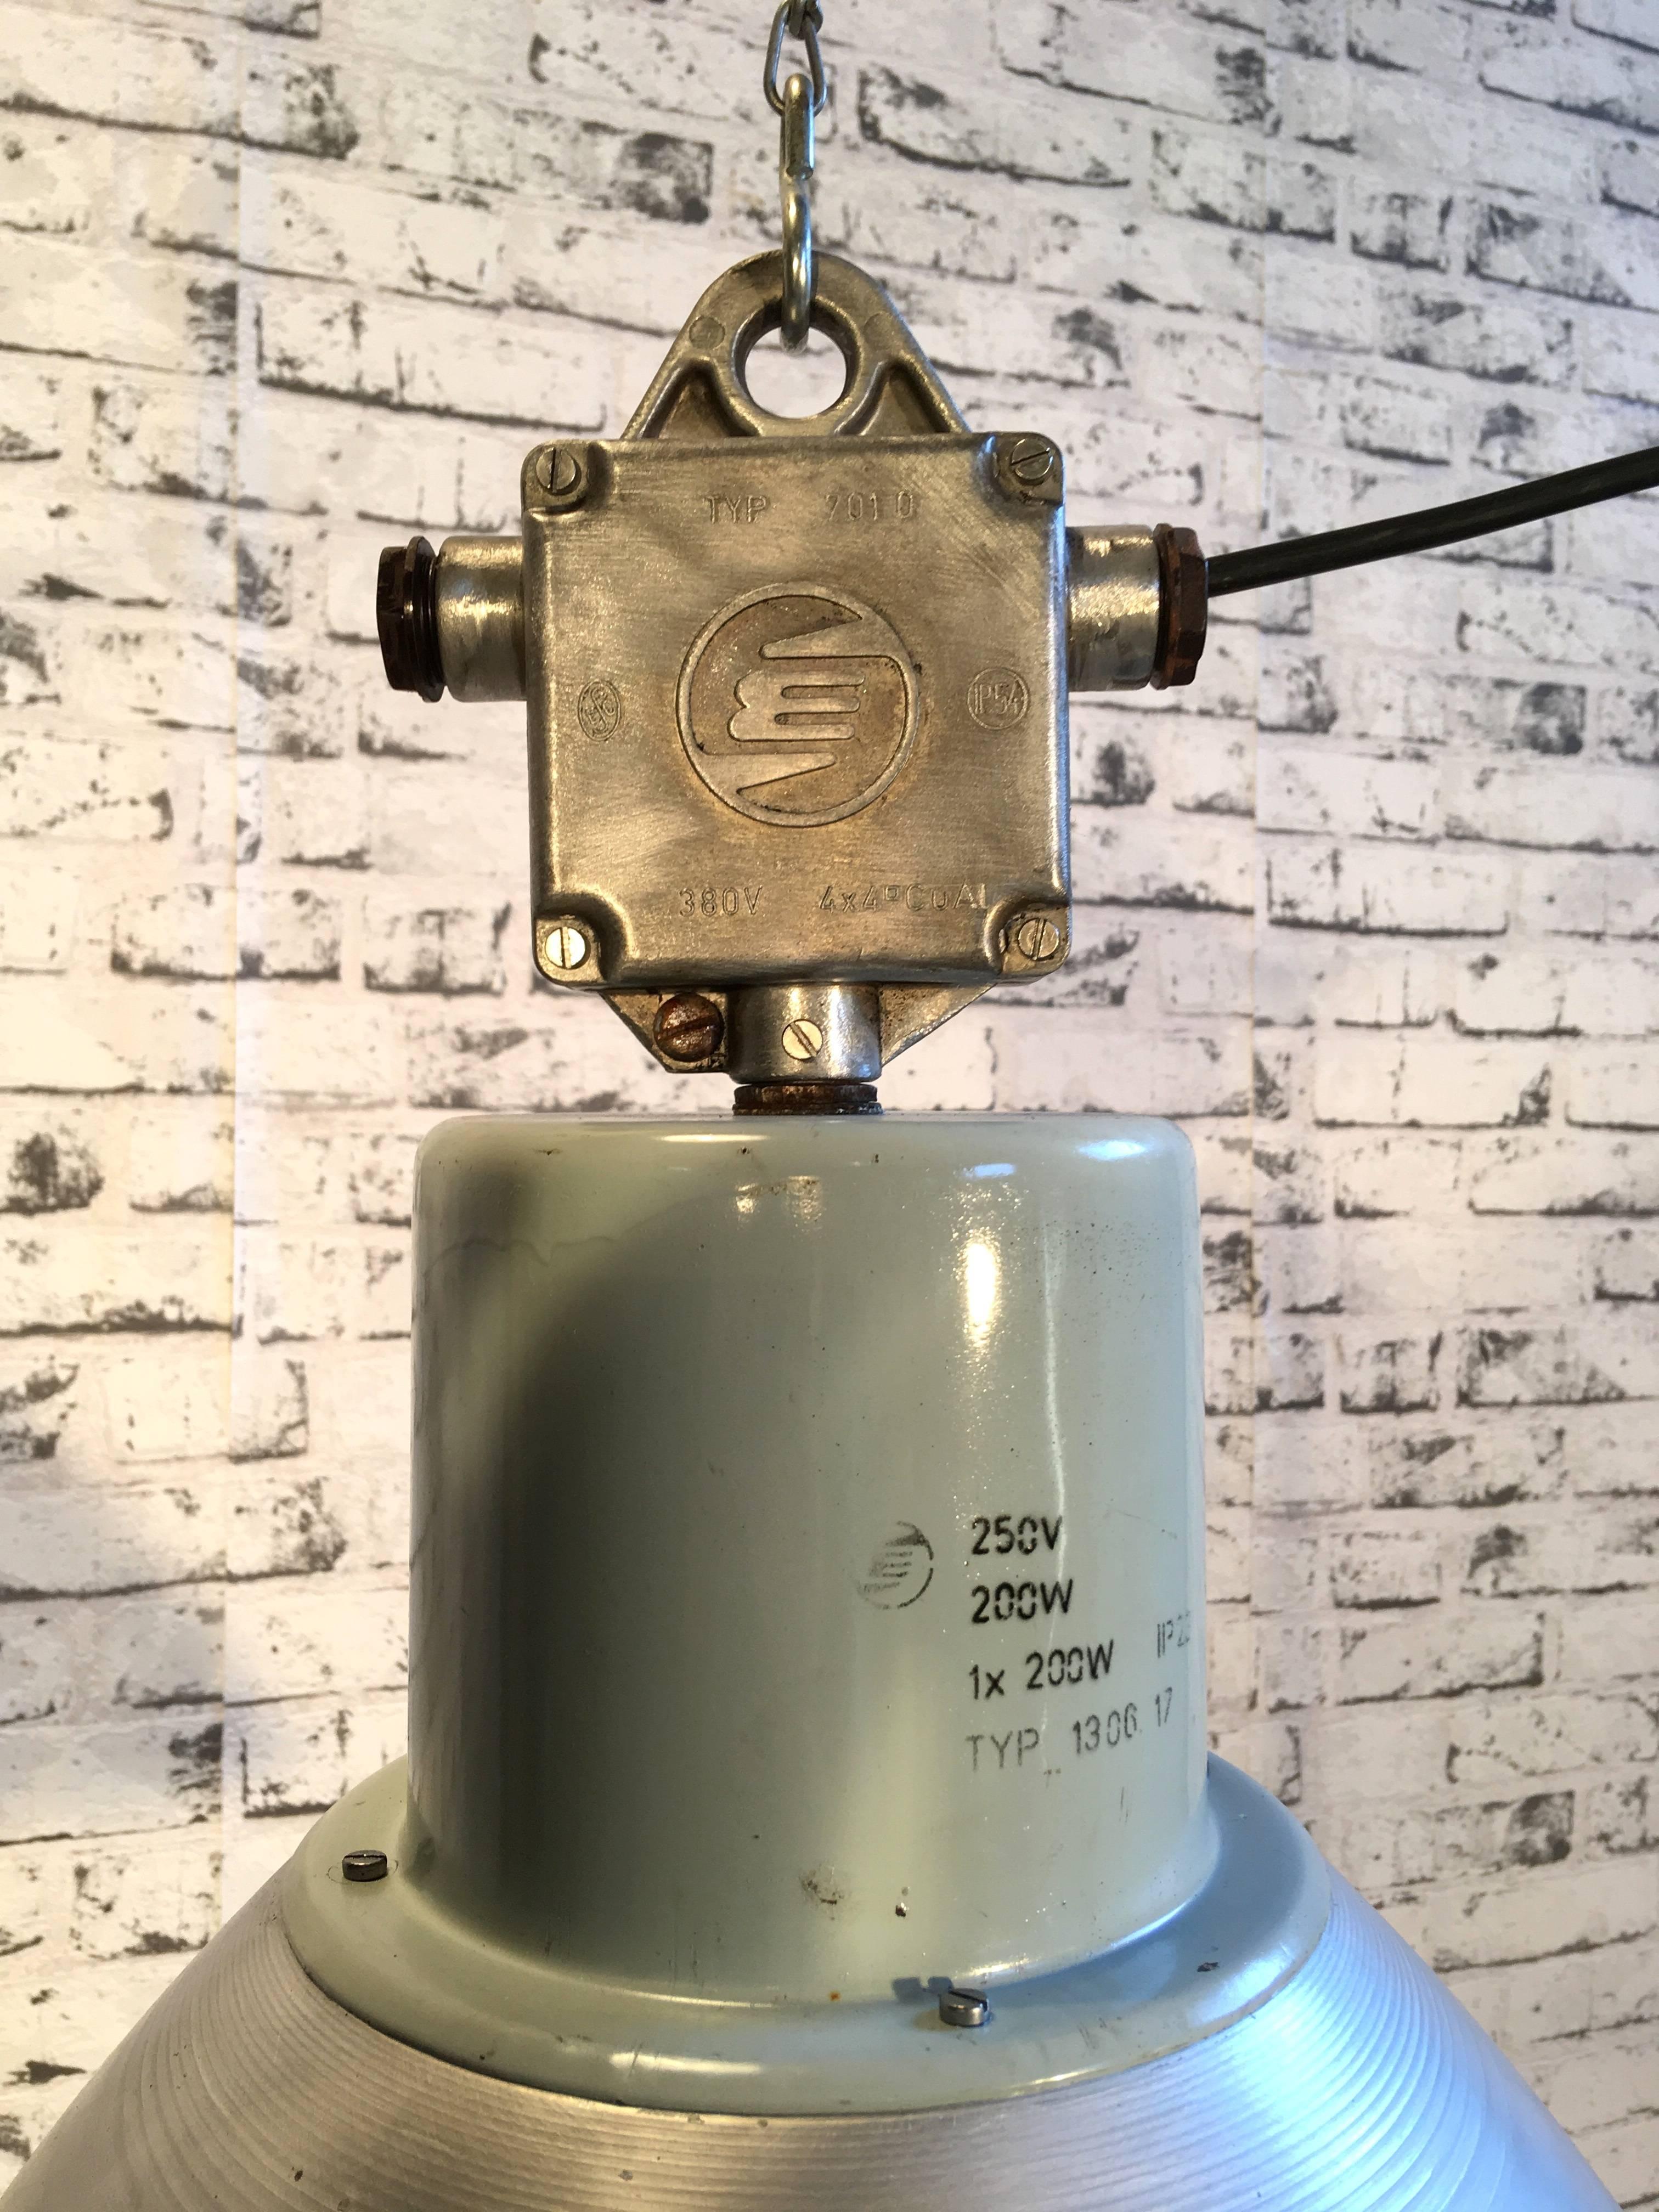 This pendant lamp was used in a factory in former Czechoslovakia in the 1960s. It features a aluminum lampshade and cast aluminum top. Lamp is fully functional, has new porcelain socket for E27 ligtbulbs and wire.
Weight of the lamp is 2.5 kg.